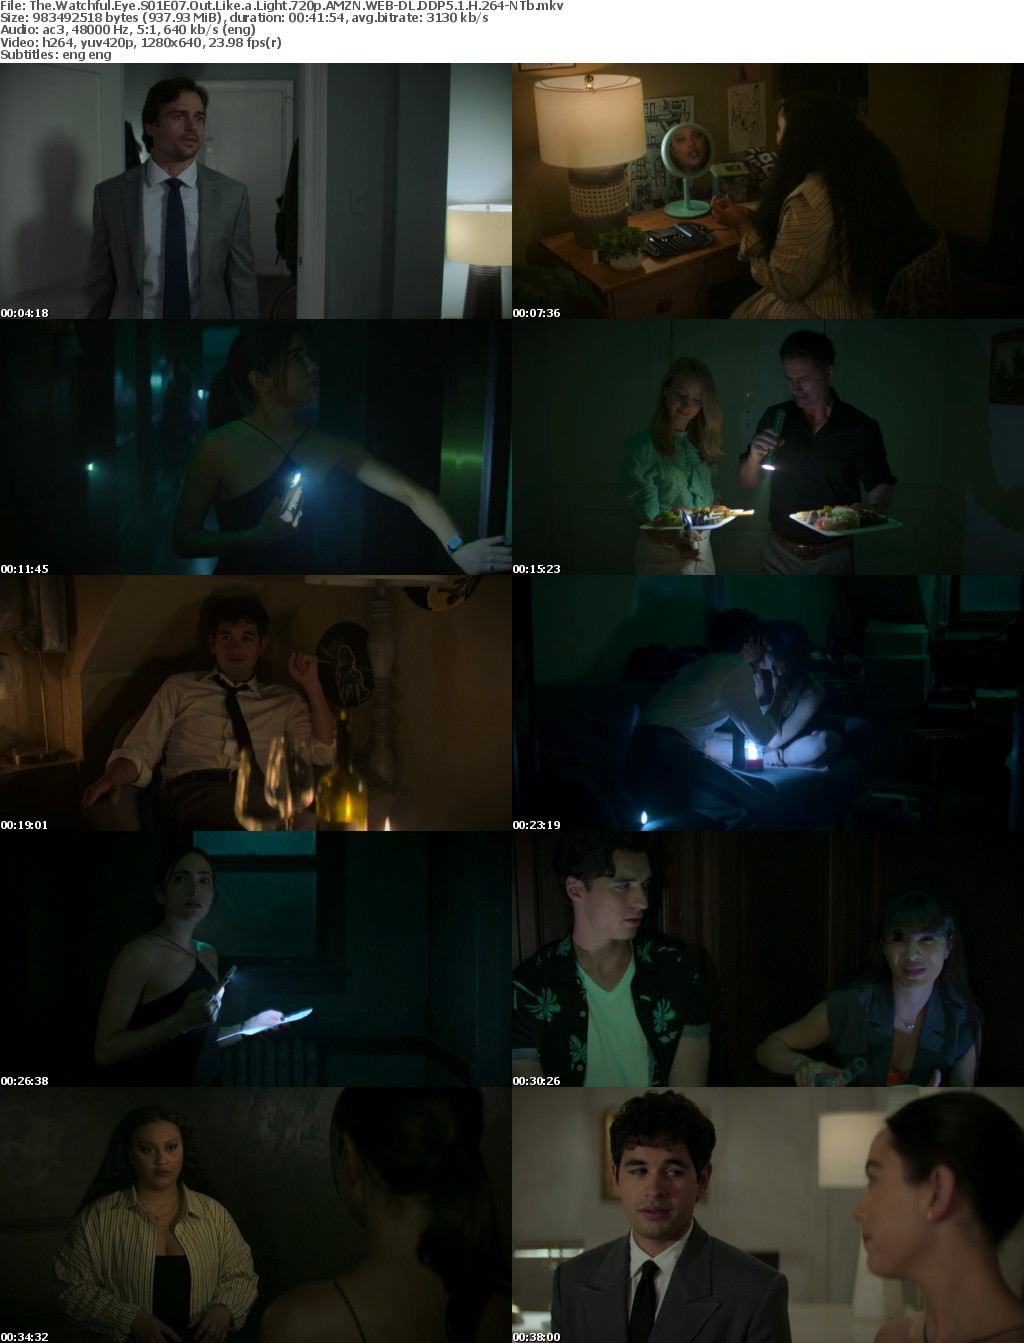 The Watchful Eye S01E07 Out Like a Light 720p AMZN WEBRip DDP5 1 x264-NTb